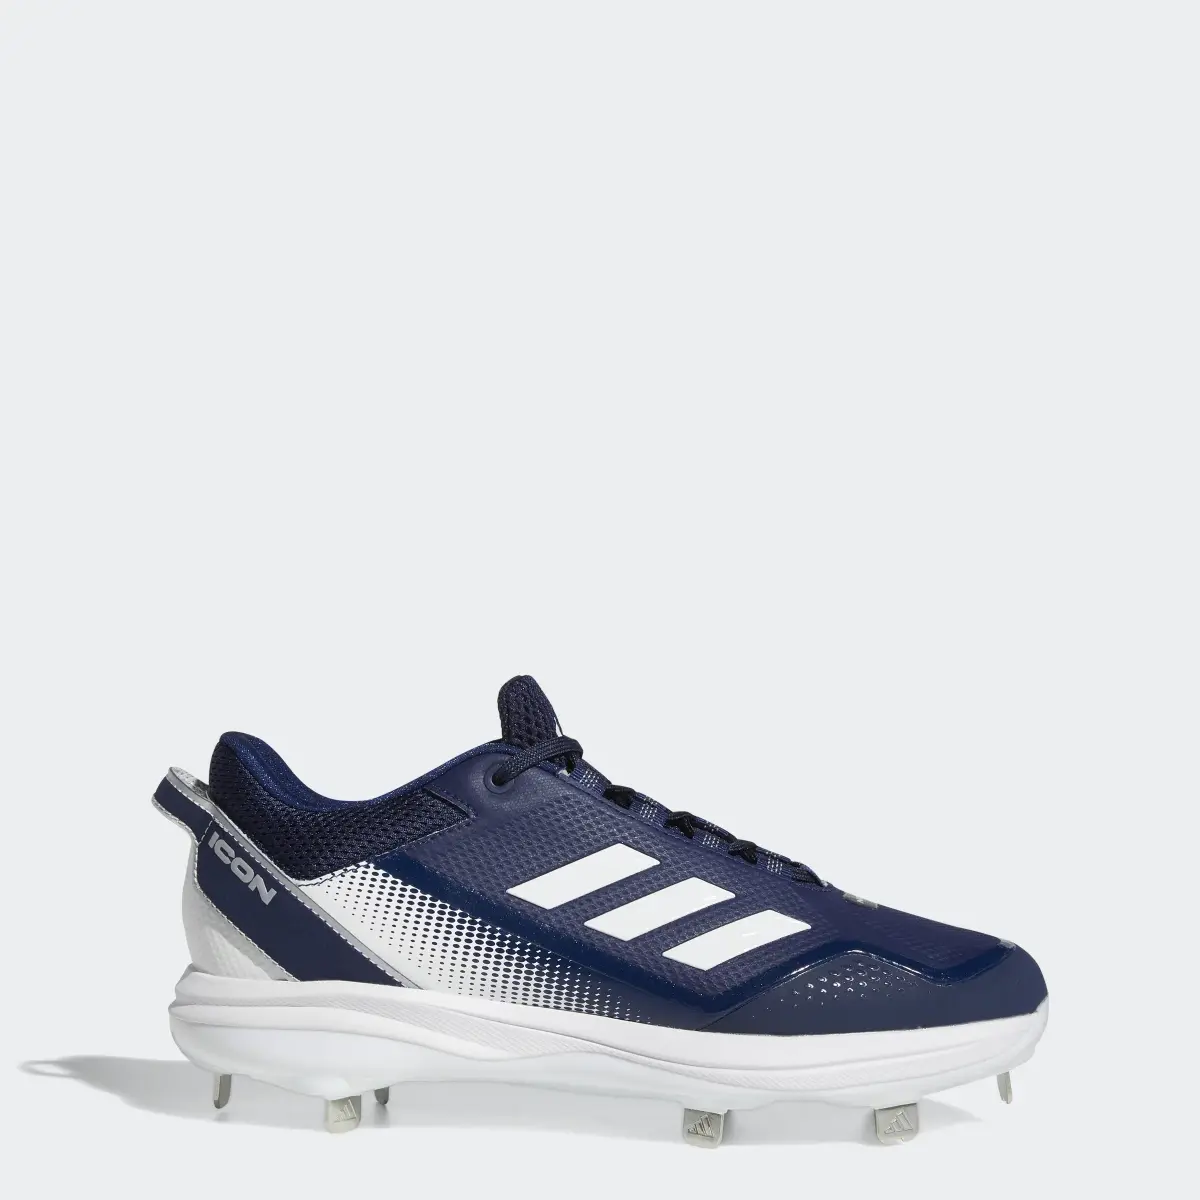 Adidas Icon 7 Cleats. 1